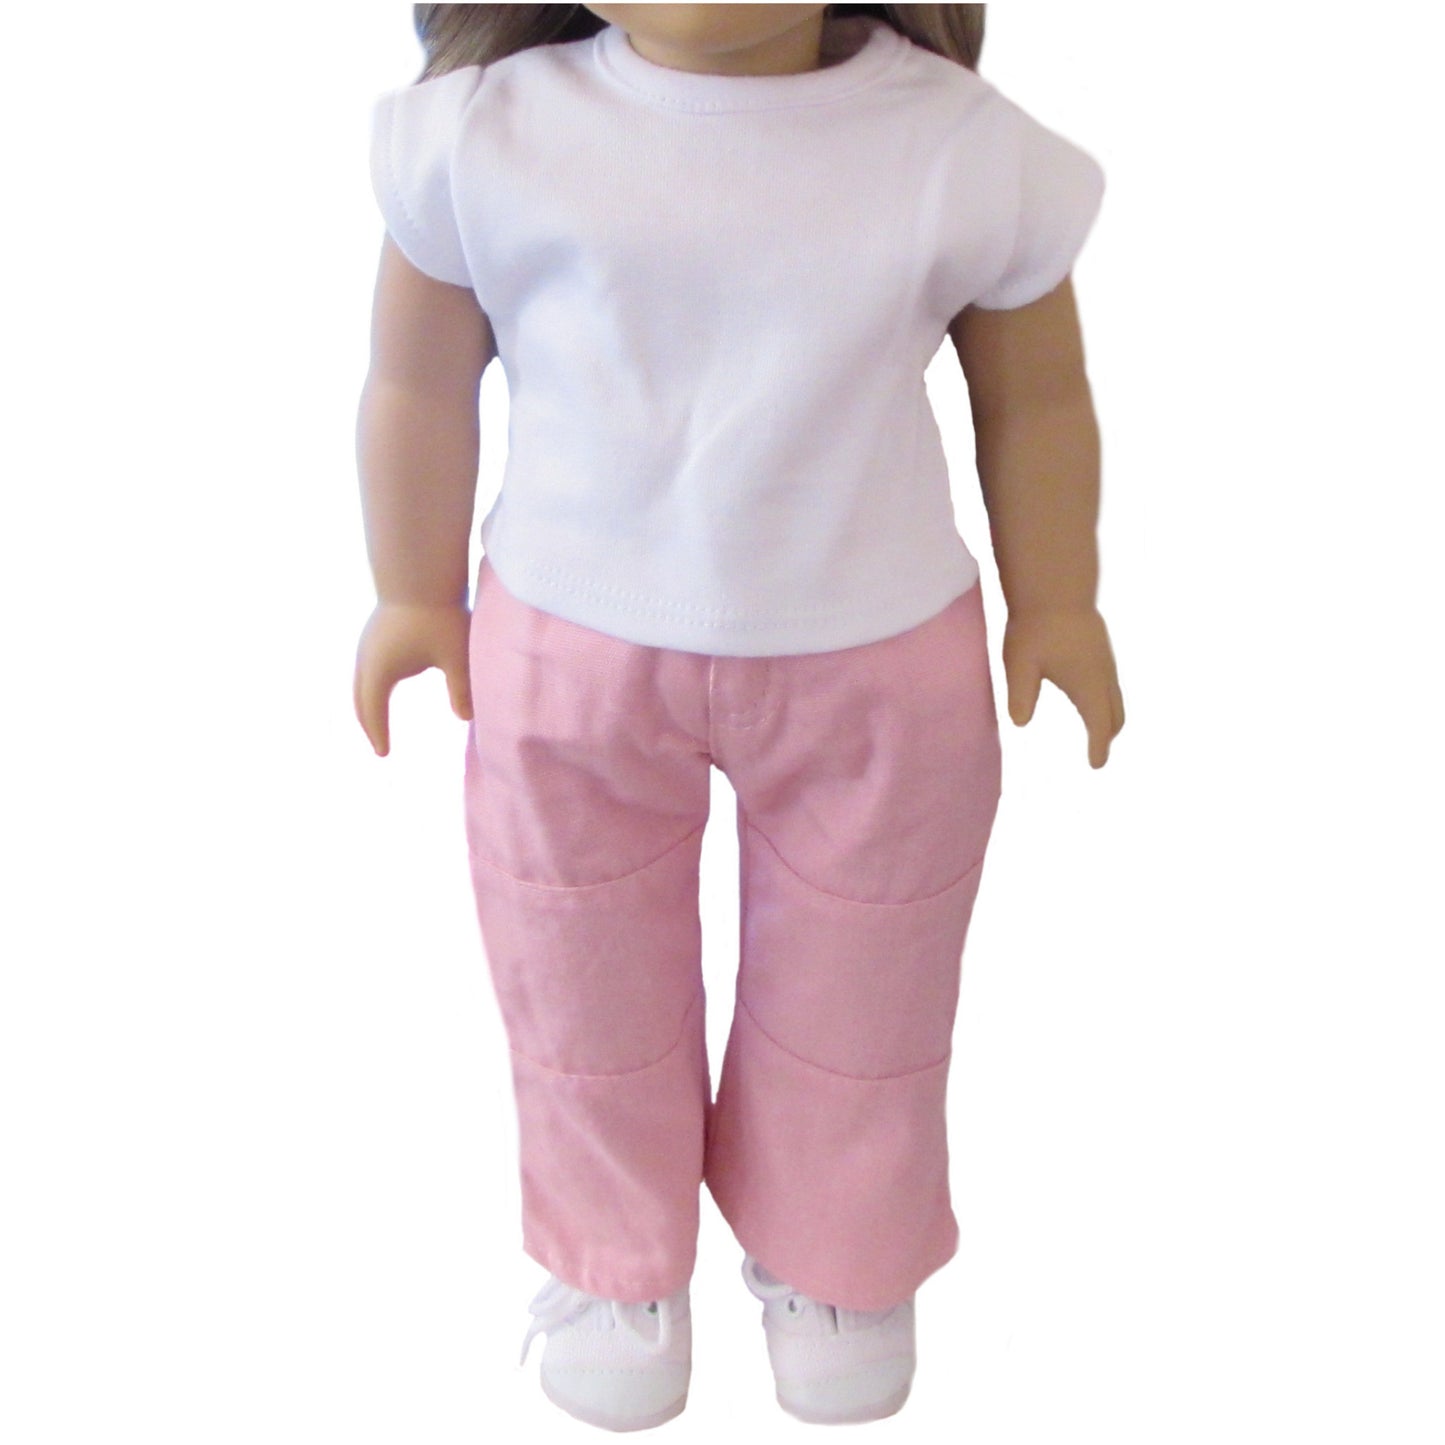 White Top and Pink Pants for 18-inch dolls with doll Front